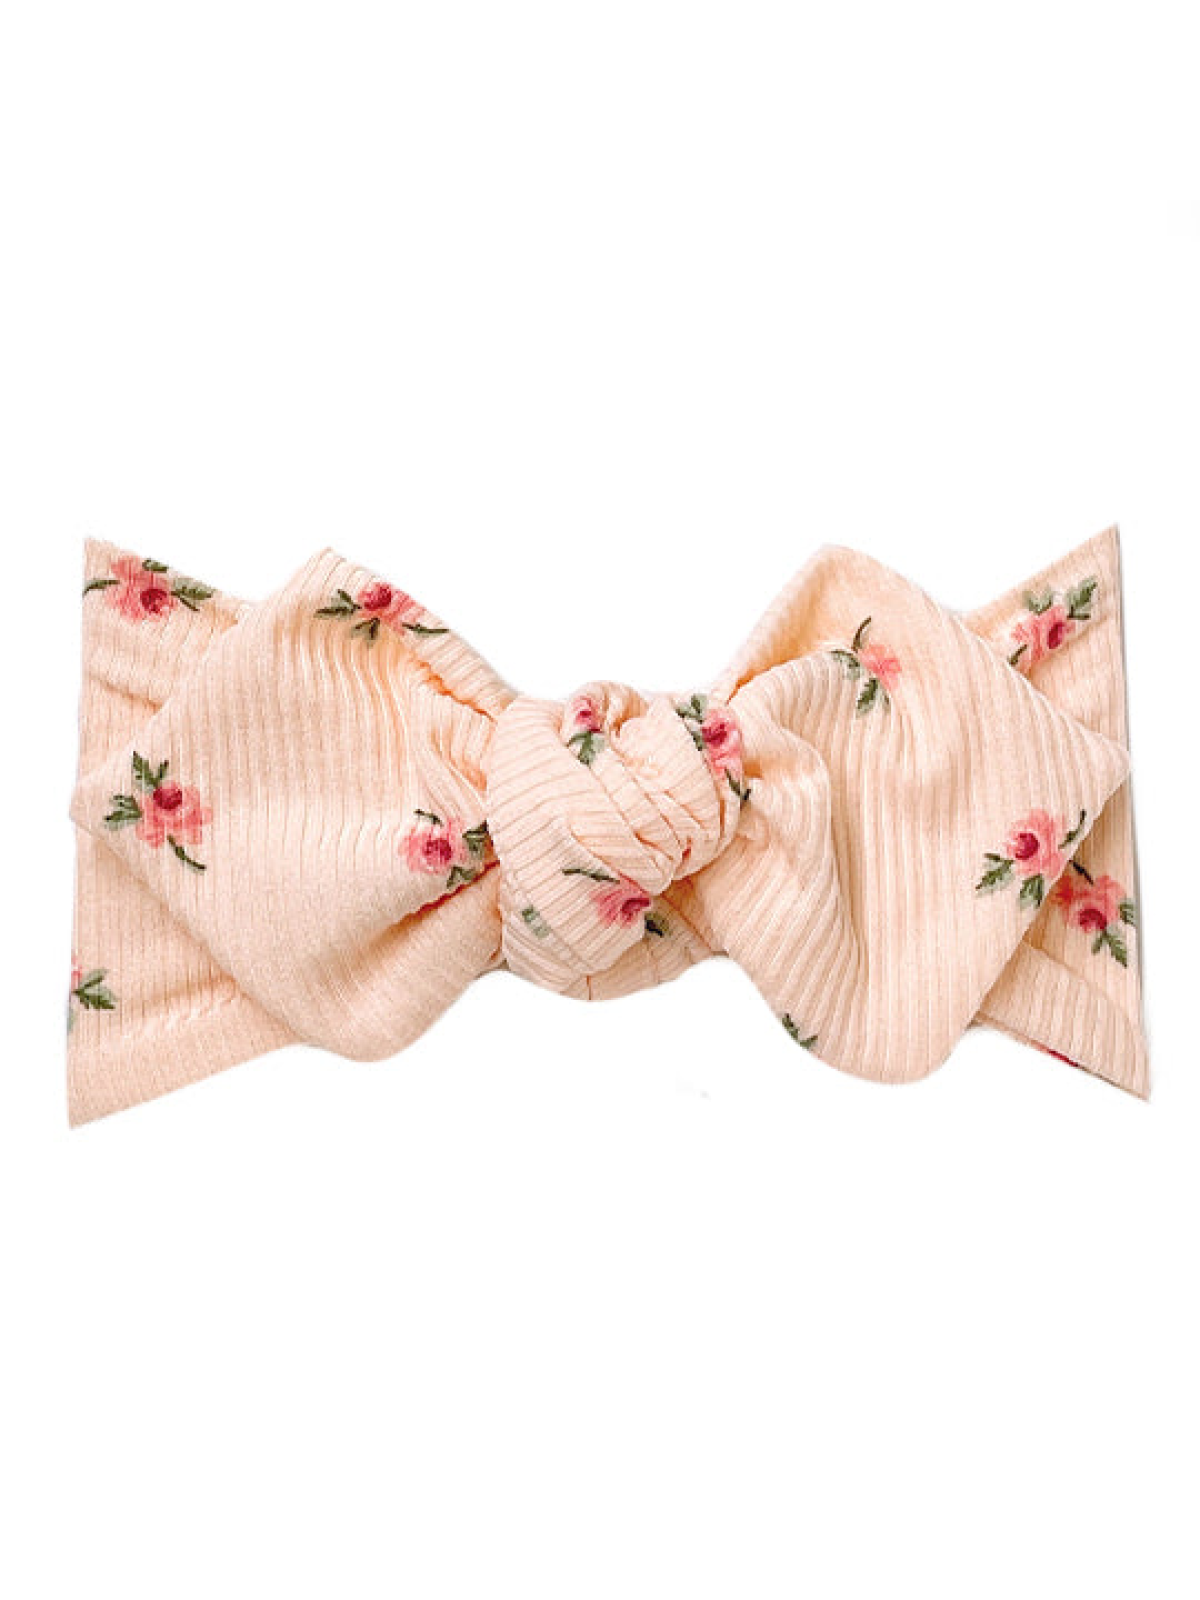 Top Knot Headband, Ribbed Peach Floral